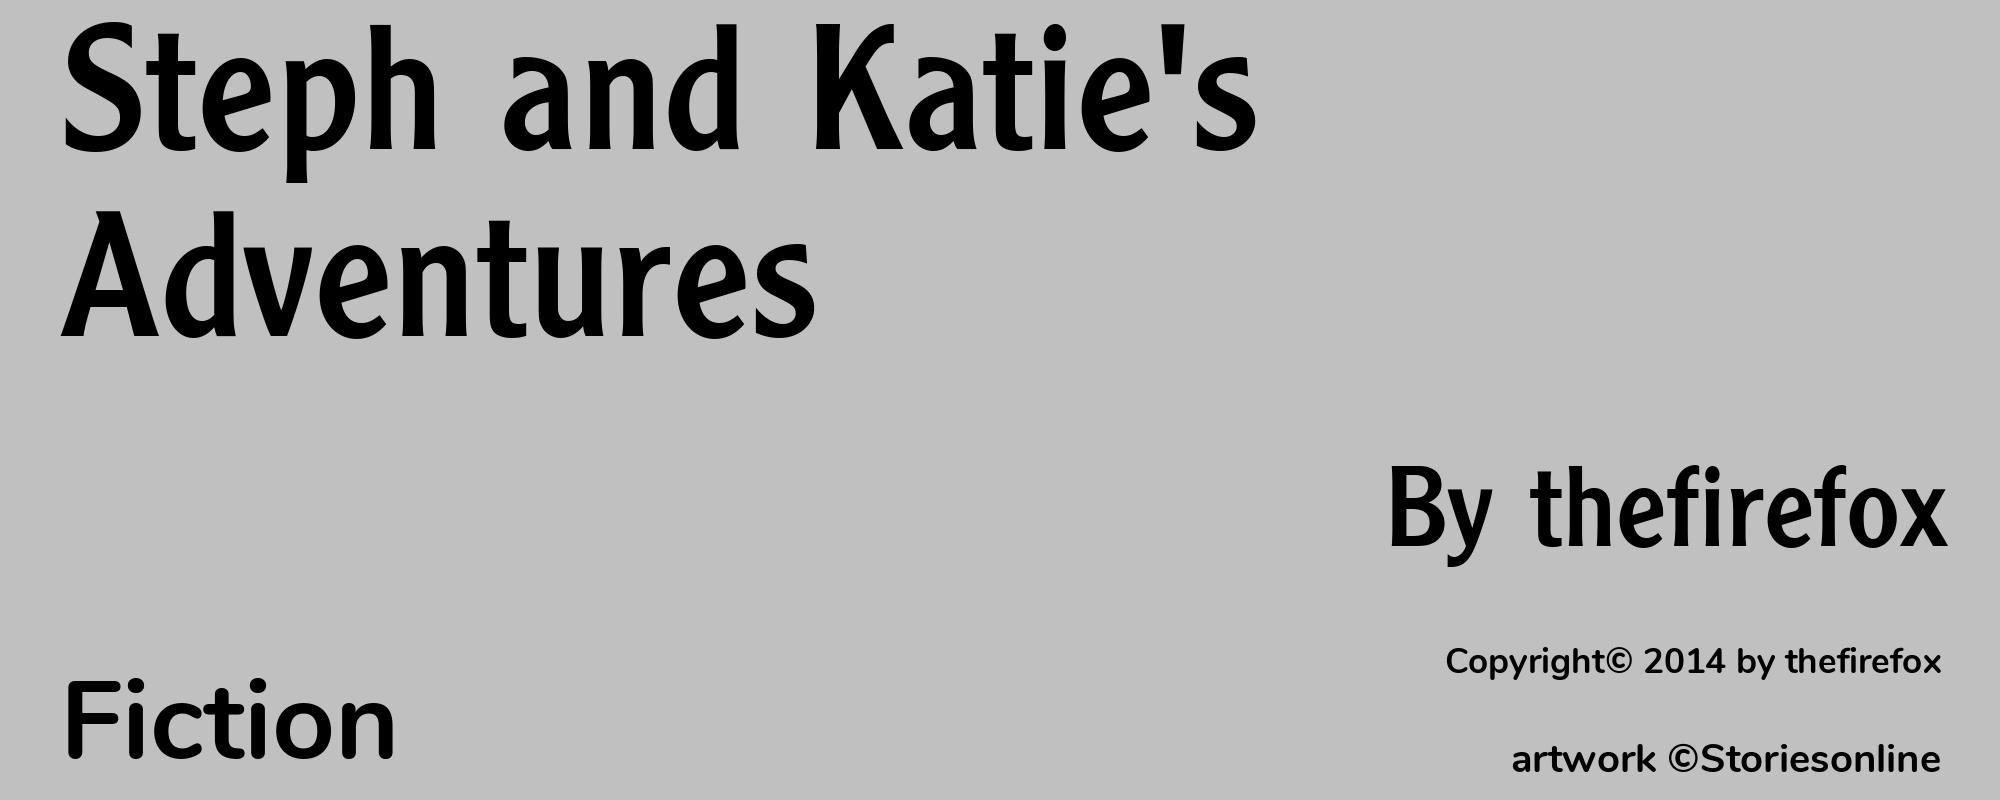 Steph and Katie's Adventures  - Cover